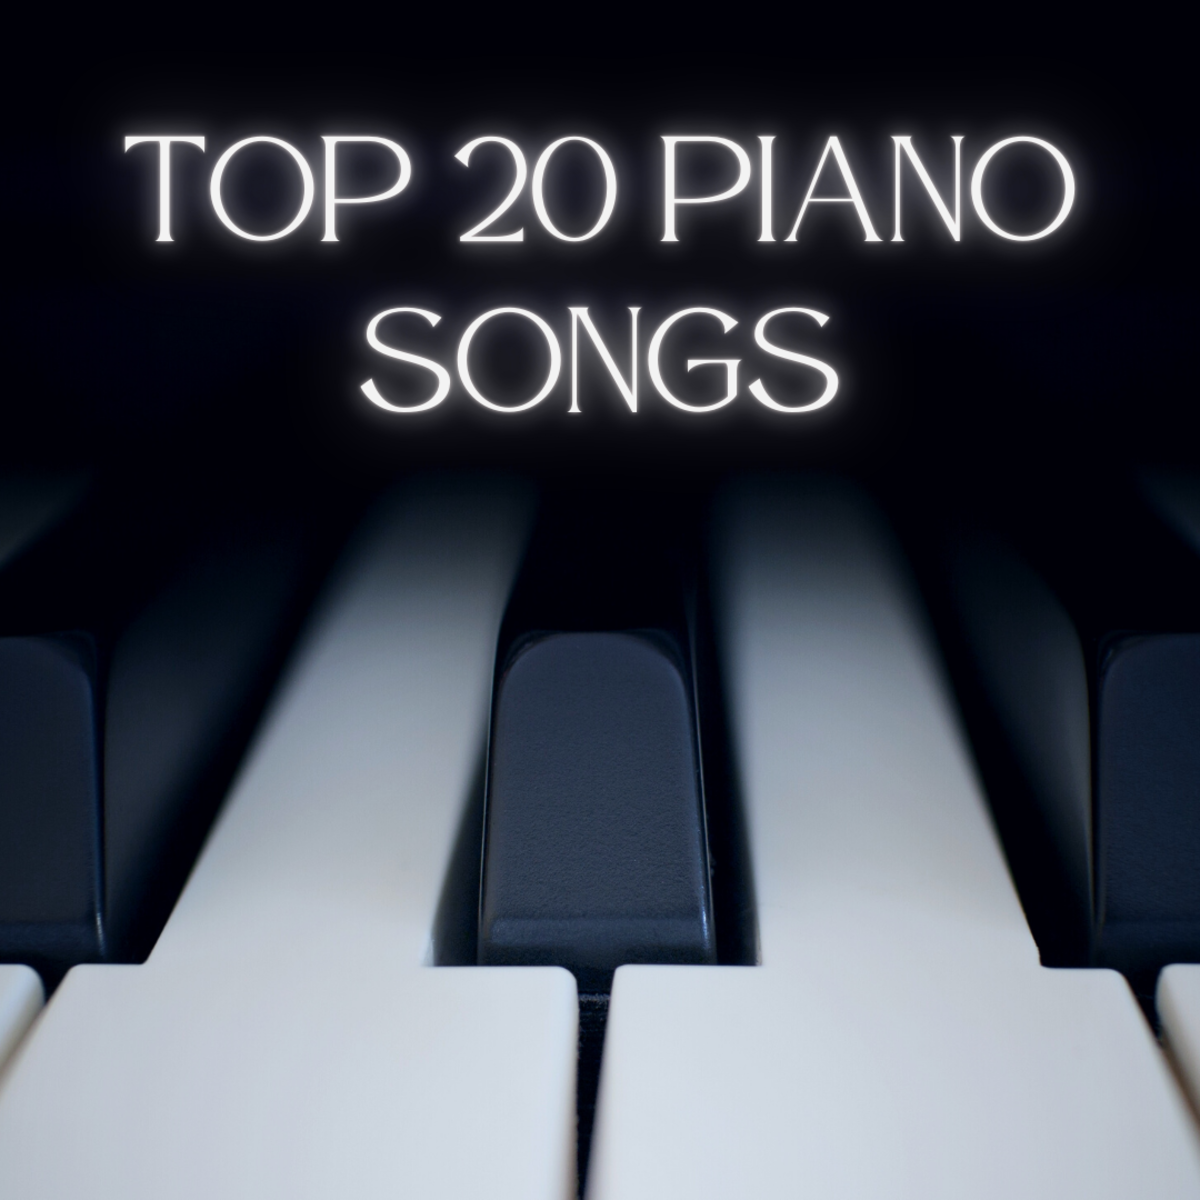 What are the best songs featuring piano? Read on to find out!